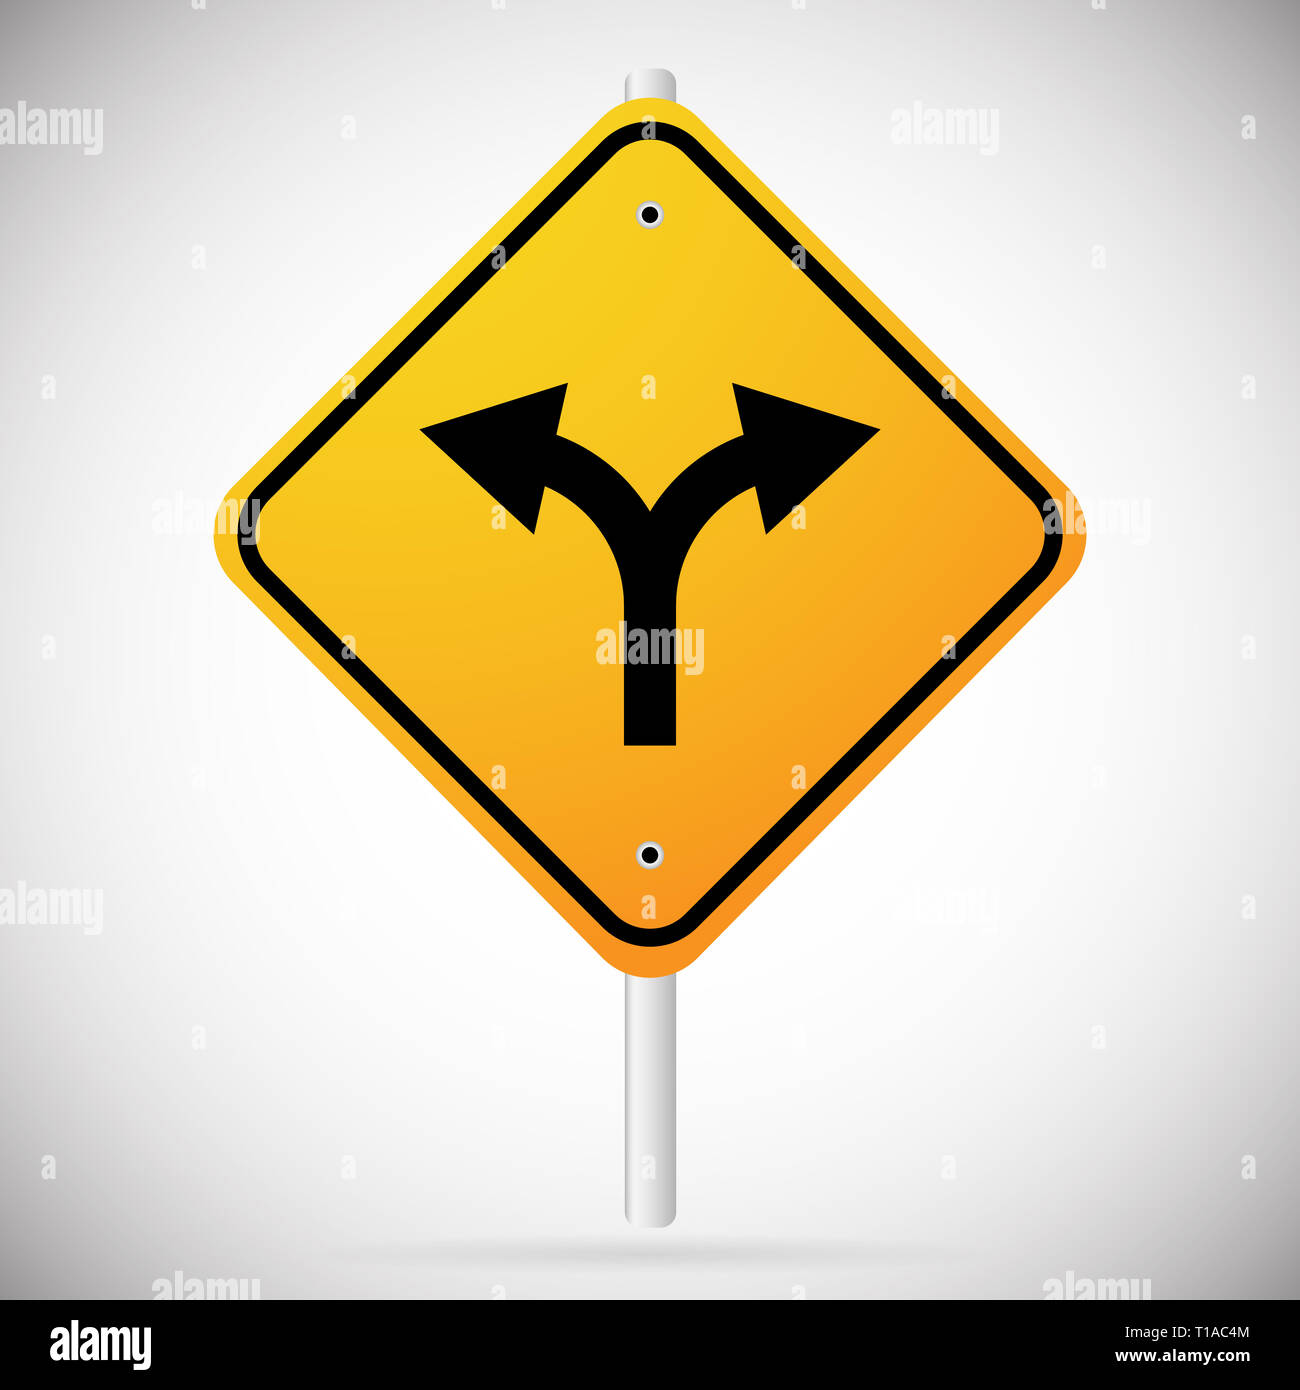 Eps 10 Vector Illustration of Junction Road Sign - Separation, two paths, two ways. Vector Illustration. Stock Photo